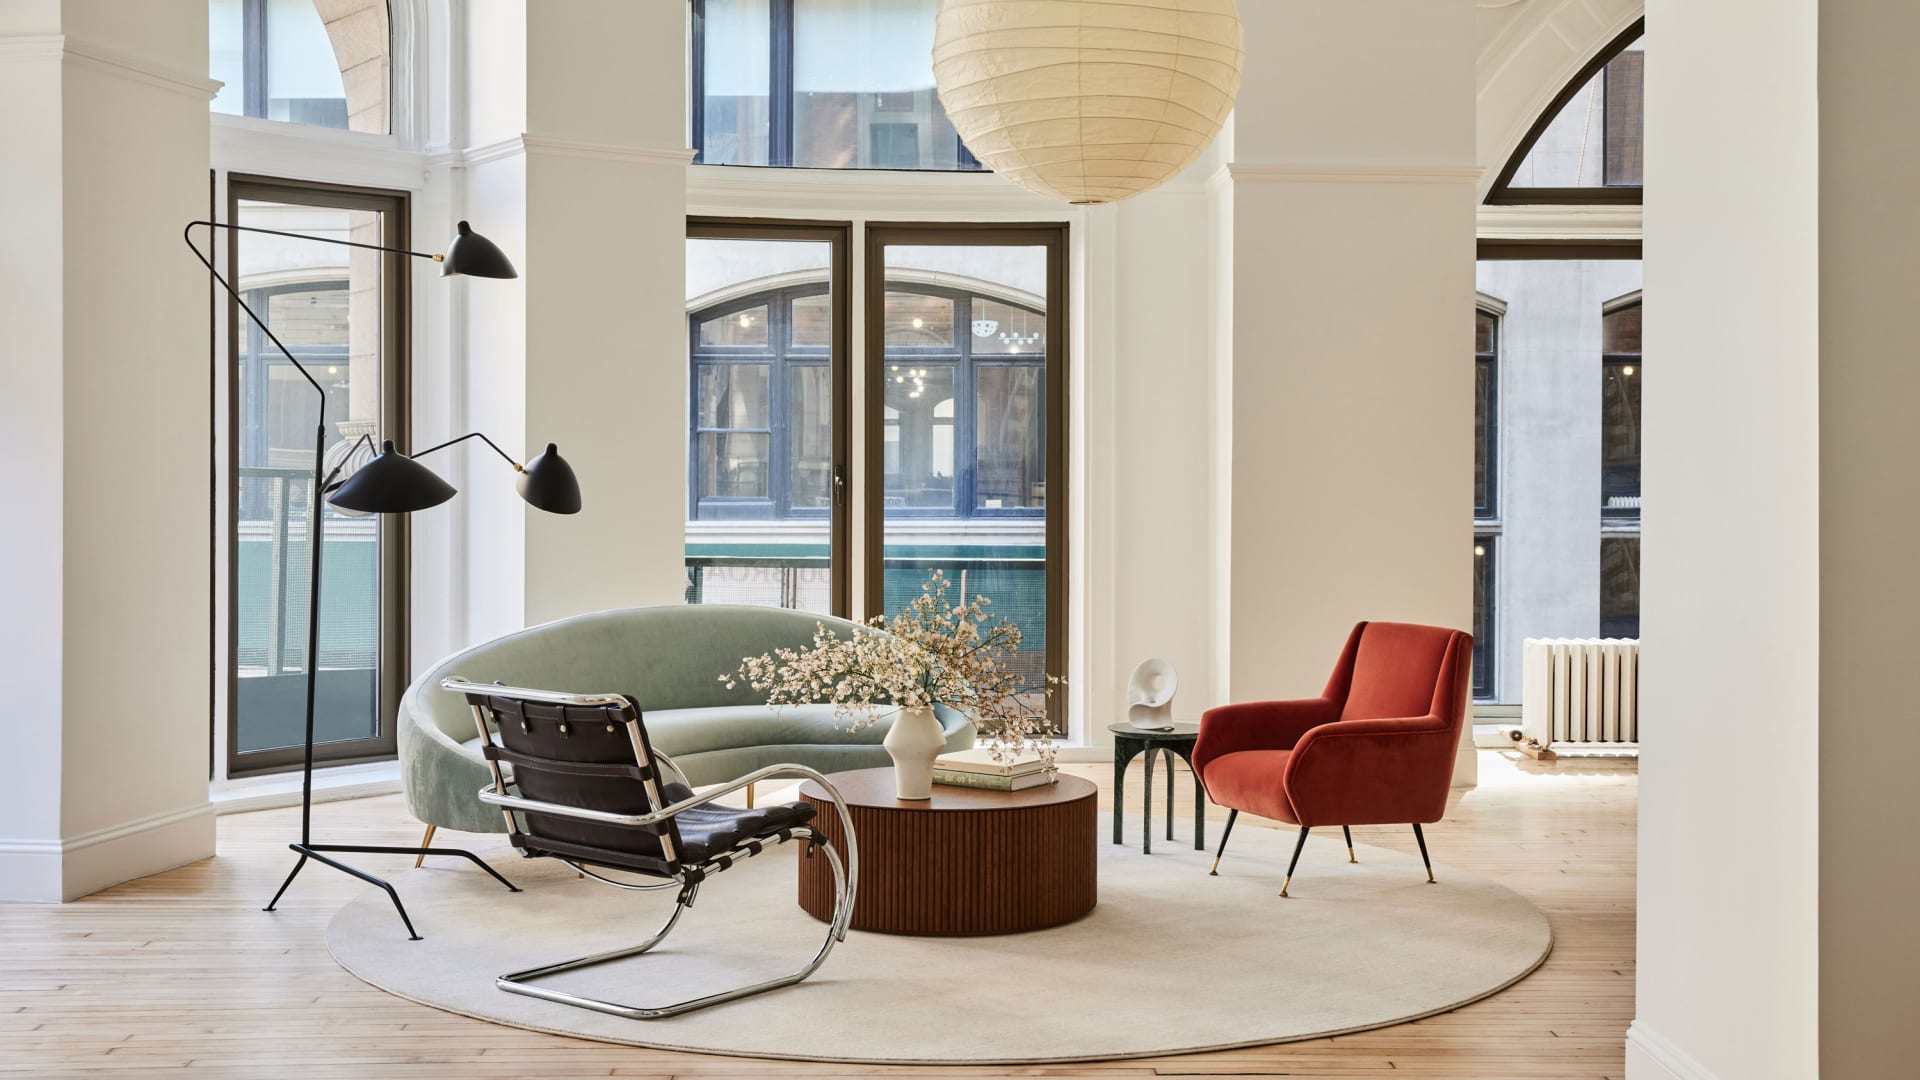 A lofty, light-filled meeting space at Avenue 8's new Manhattan office.